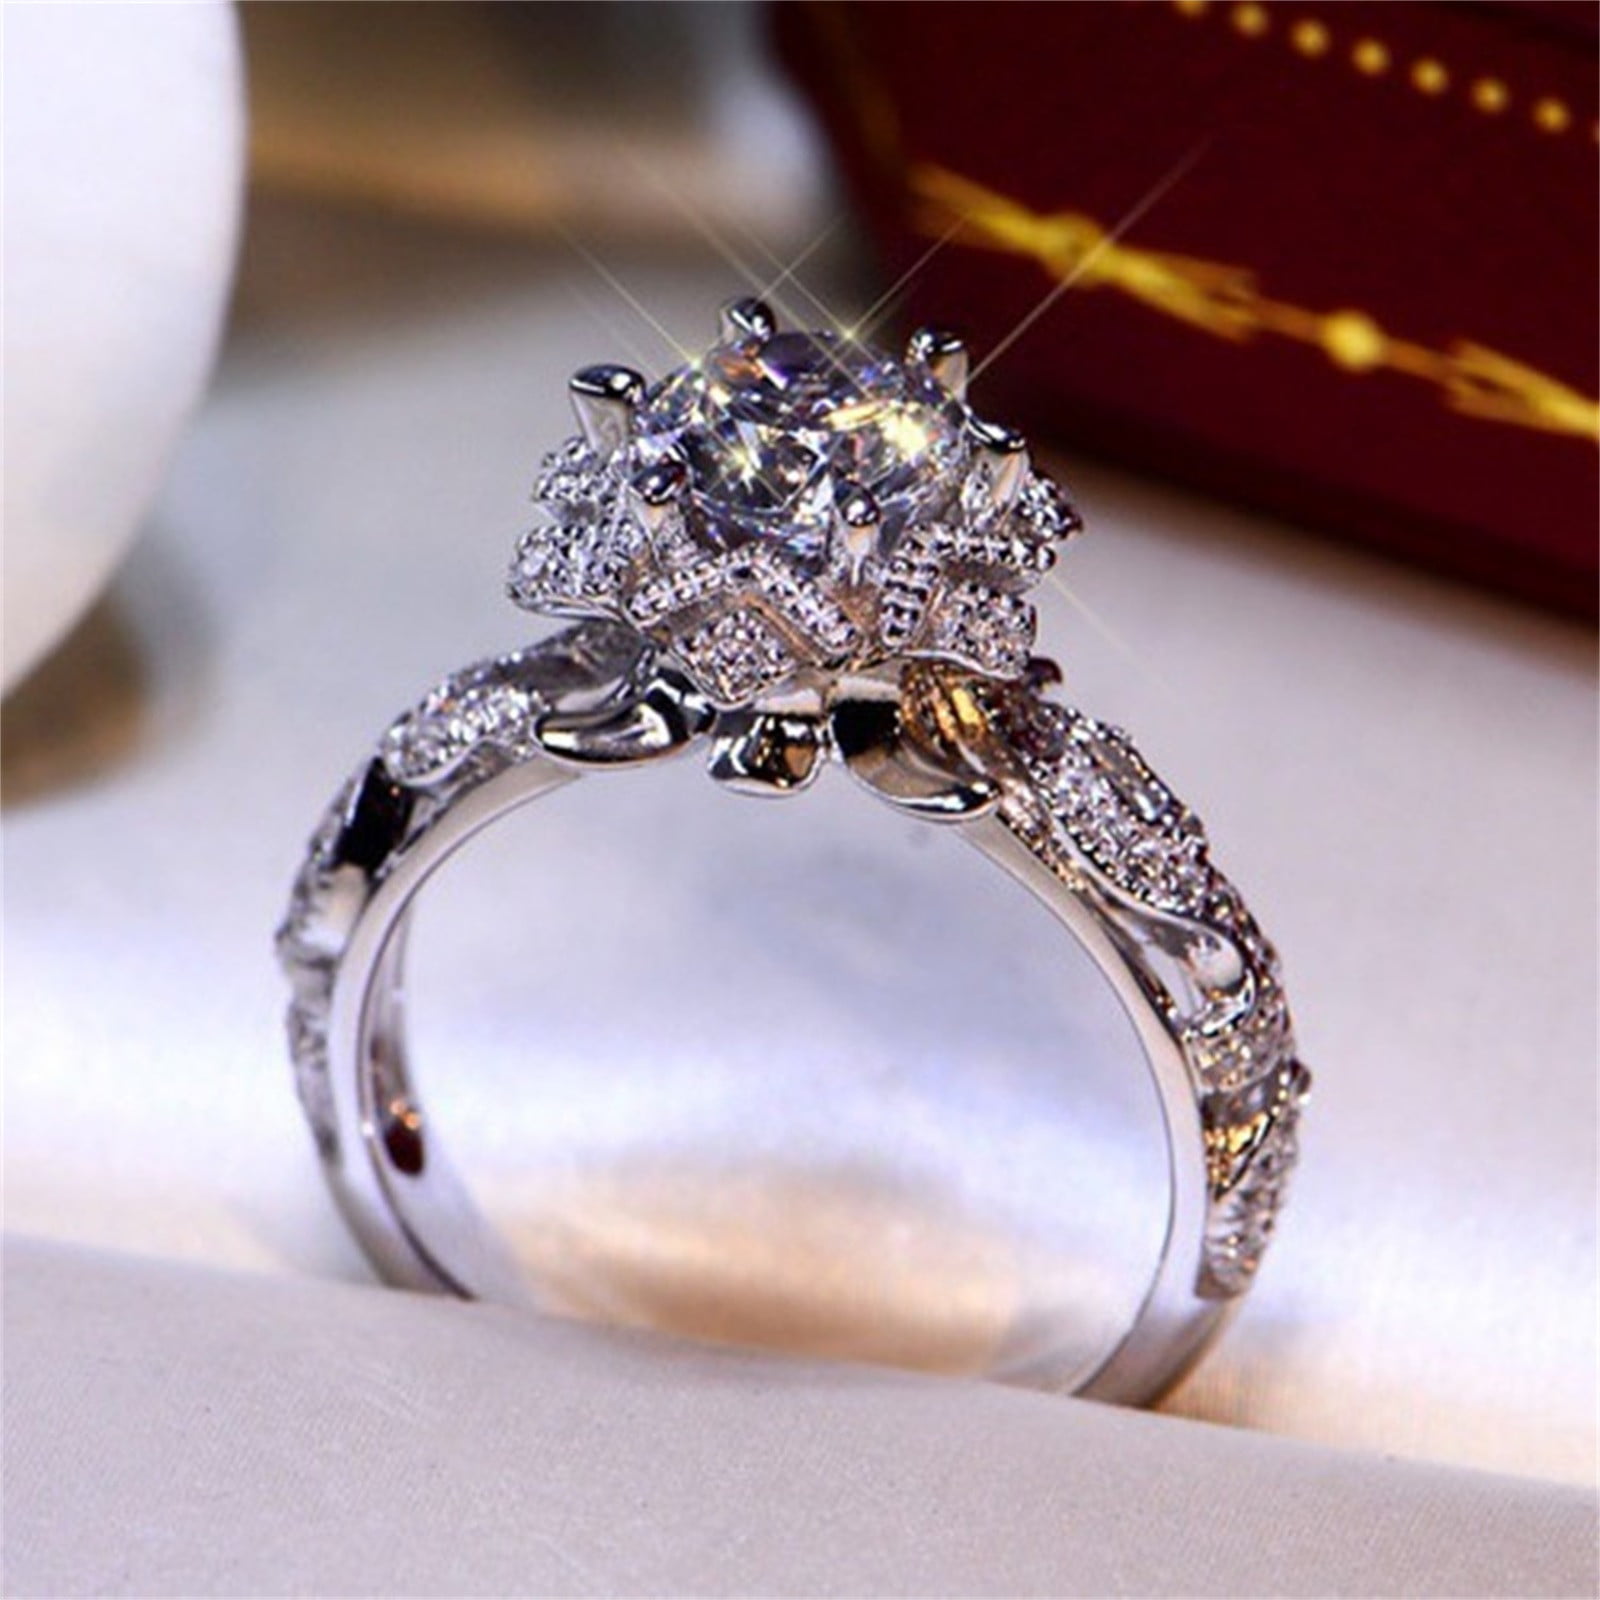 Vecalon 925 Silver Diamond Princess Wedding Ring Set Elegant Bridal Jewelry  For Women, Promise, Love, And Engagement Rings From Tyawr, $22.16 |  DHgate.Com